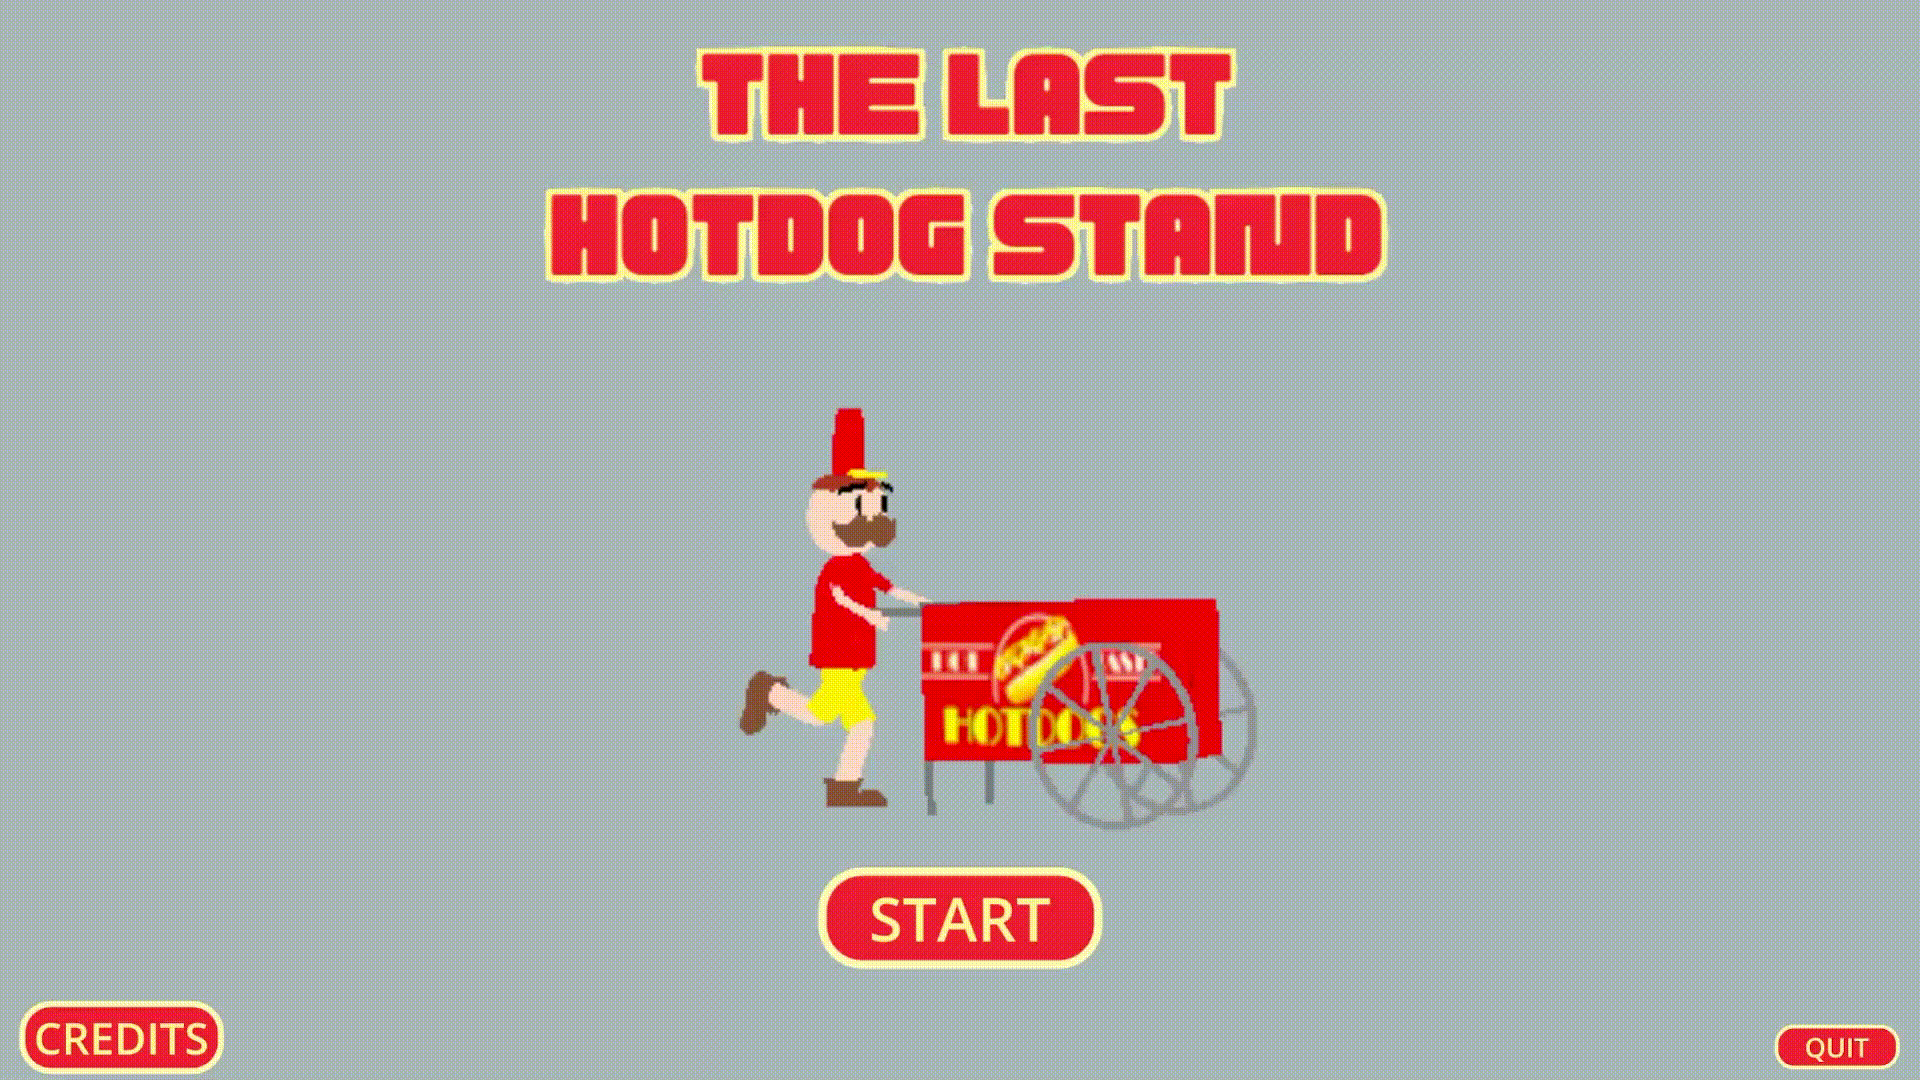 The Last (Hot Dog) Stand